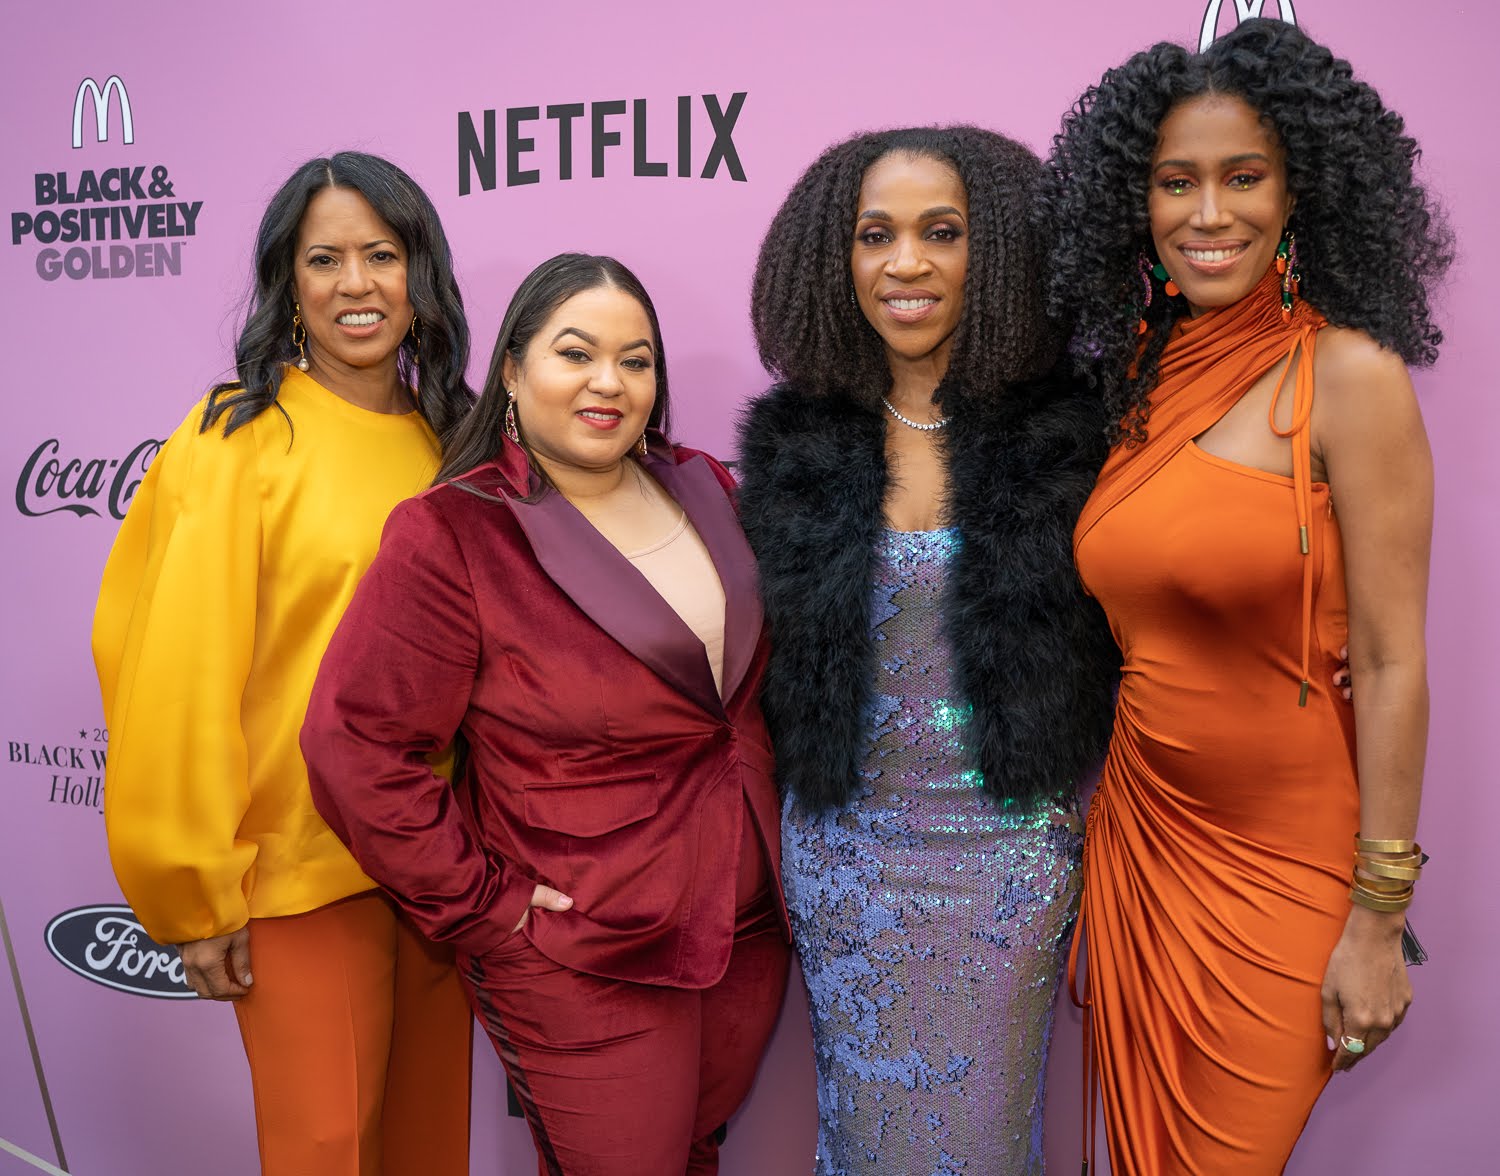 Black Women in Hollywood red carpet full of glamour, color and sexiness - Rolling Out